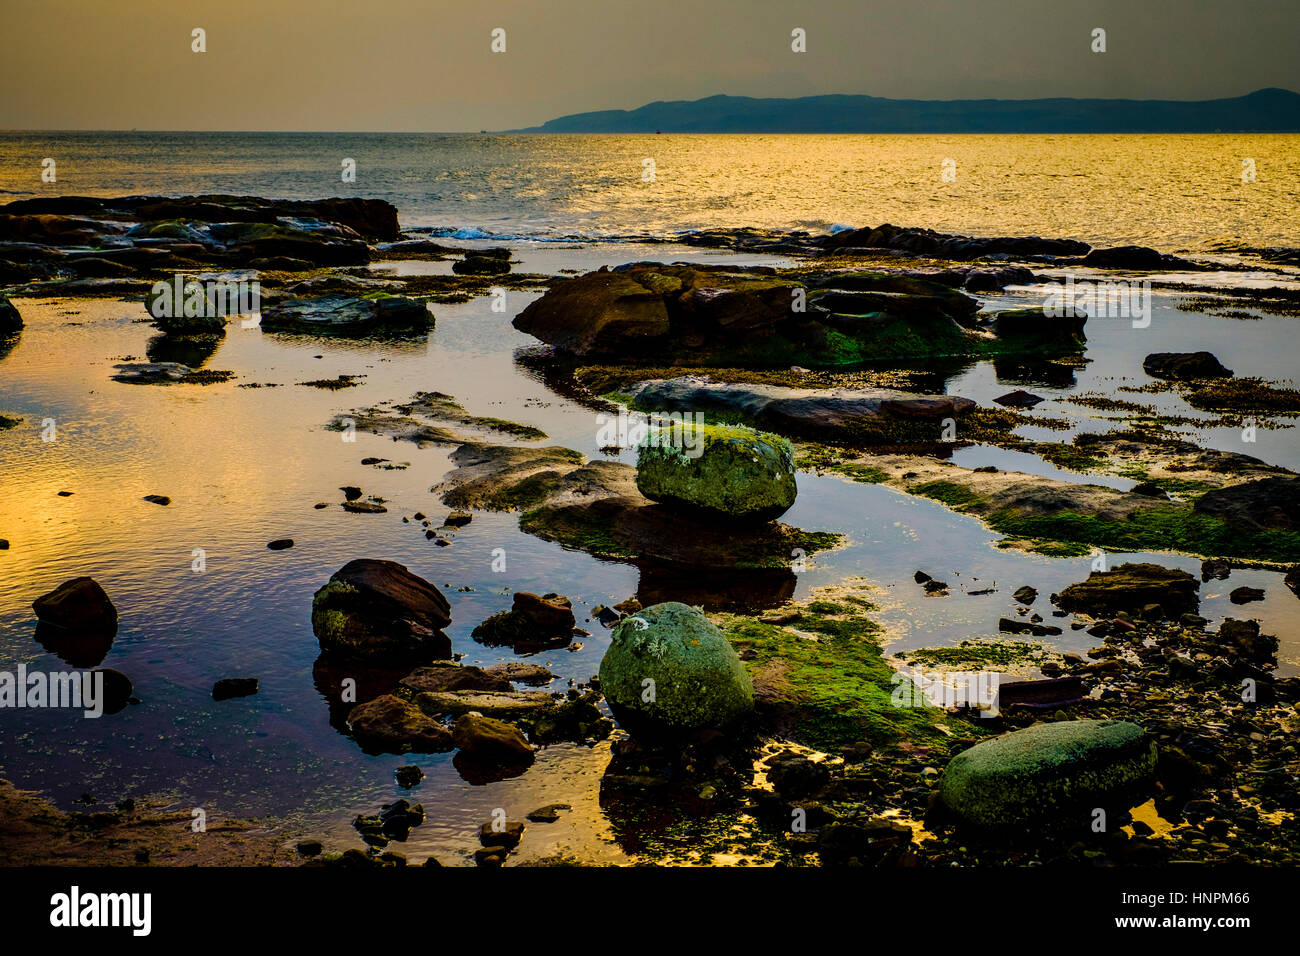 Evening light on the rocks at Little Skate Bay on the west coast of the island of Great Cumbrae, Scotland.  The Isle of Bute can be seen in the backgr Stock Photo